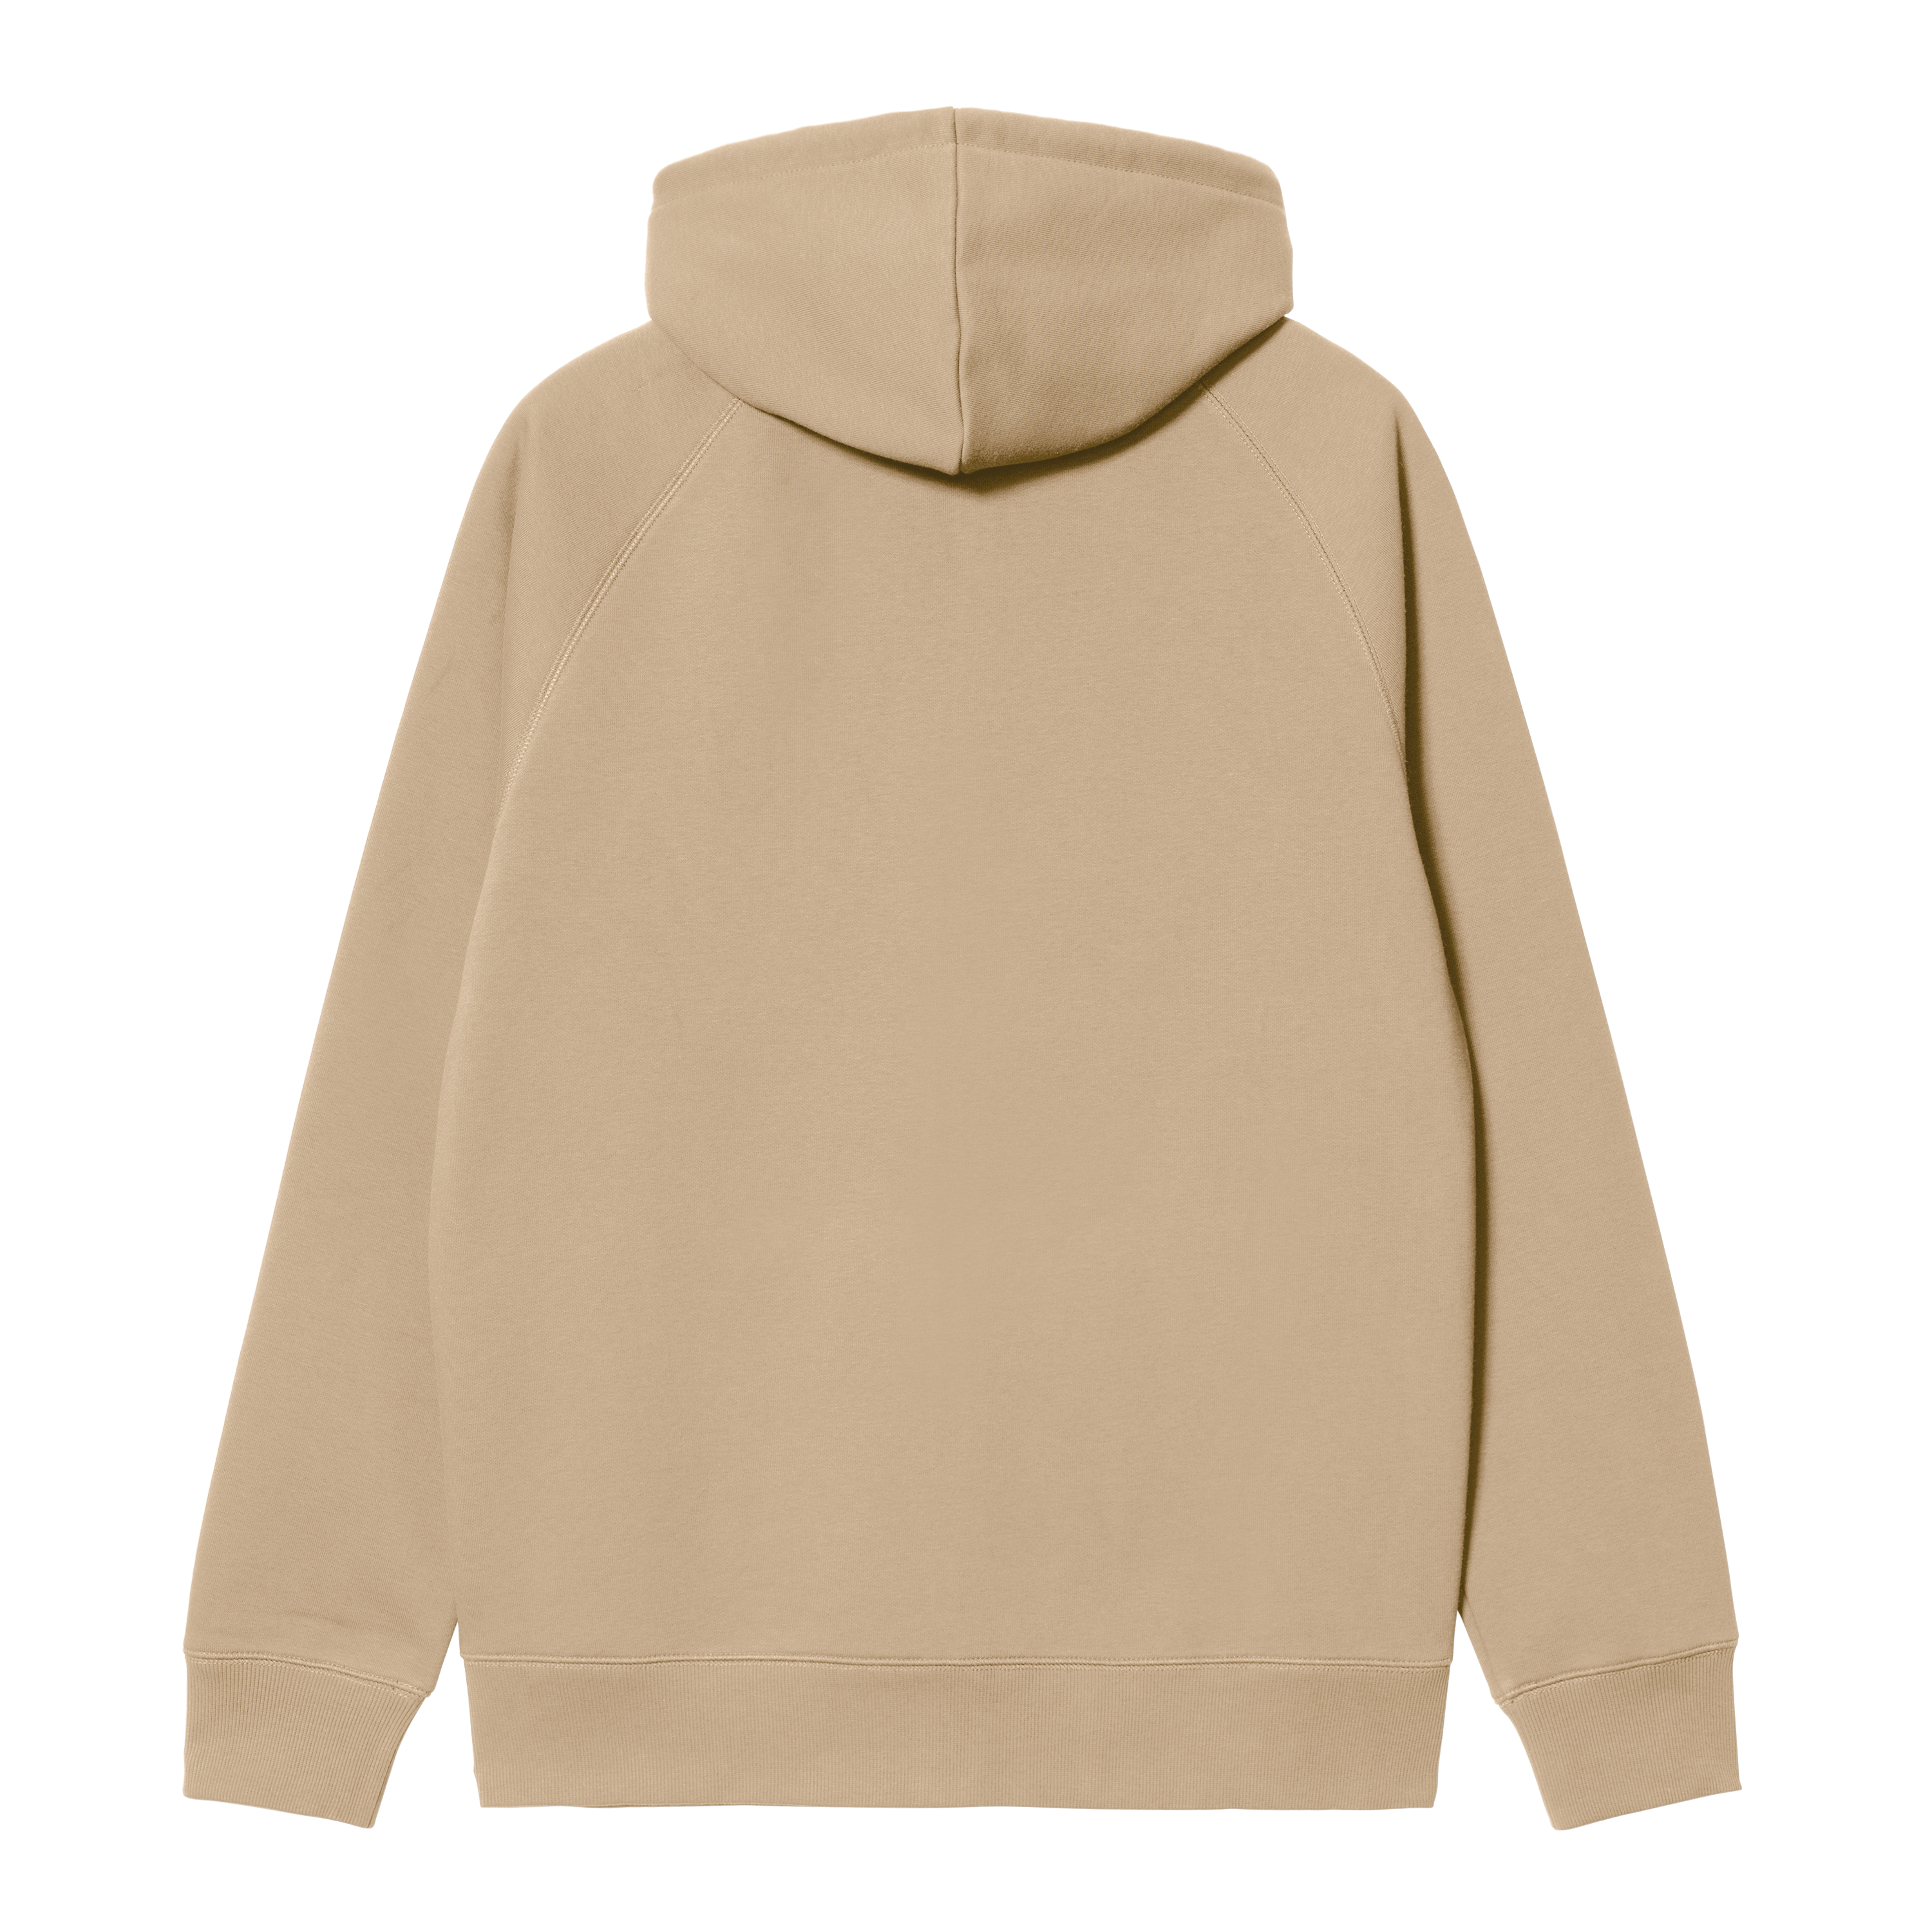 Carhartt WIP -  HOODED CHASE JACKET - Sable/Gold